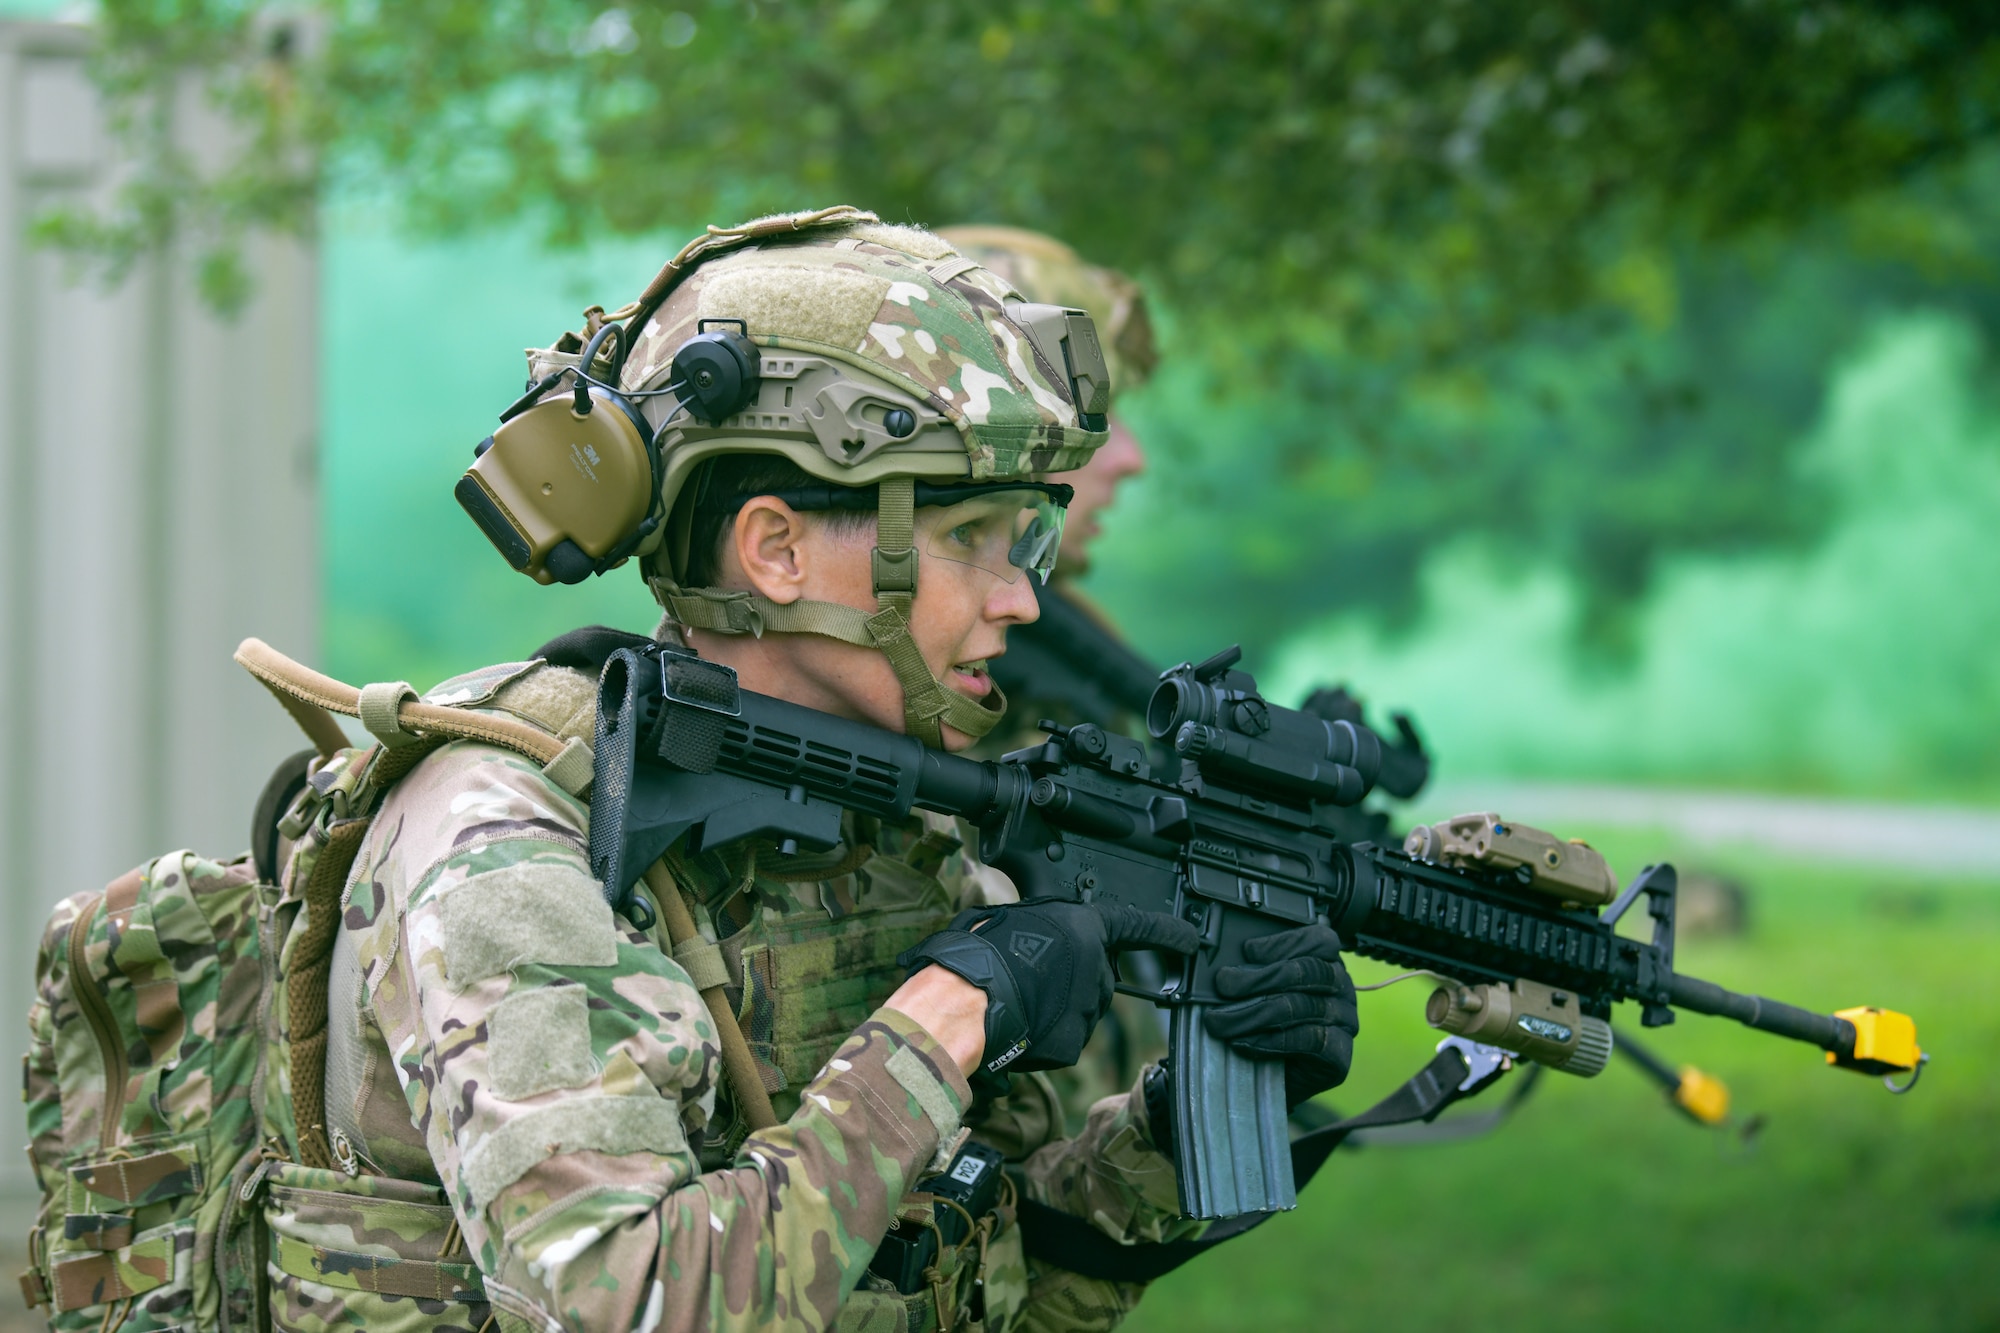 Tech. Sgt. Britney Simpson, an Integrated Defense Leadership Course student assigned to the 927th Security Forces Squadron, MacDill Air Force Base, Florida, leads her squad in an assault on an opposing force position during an area security operations exercise at Camp James A. Garfield Joint Military Training Center, Ohio, July 27, 2022.